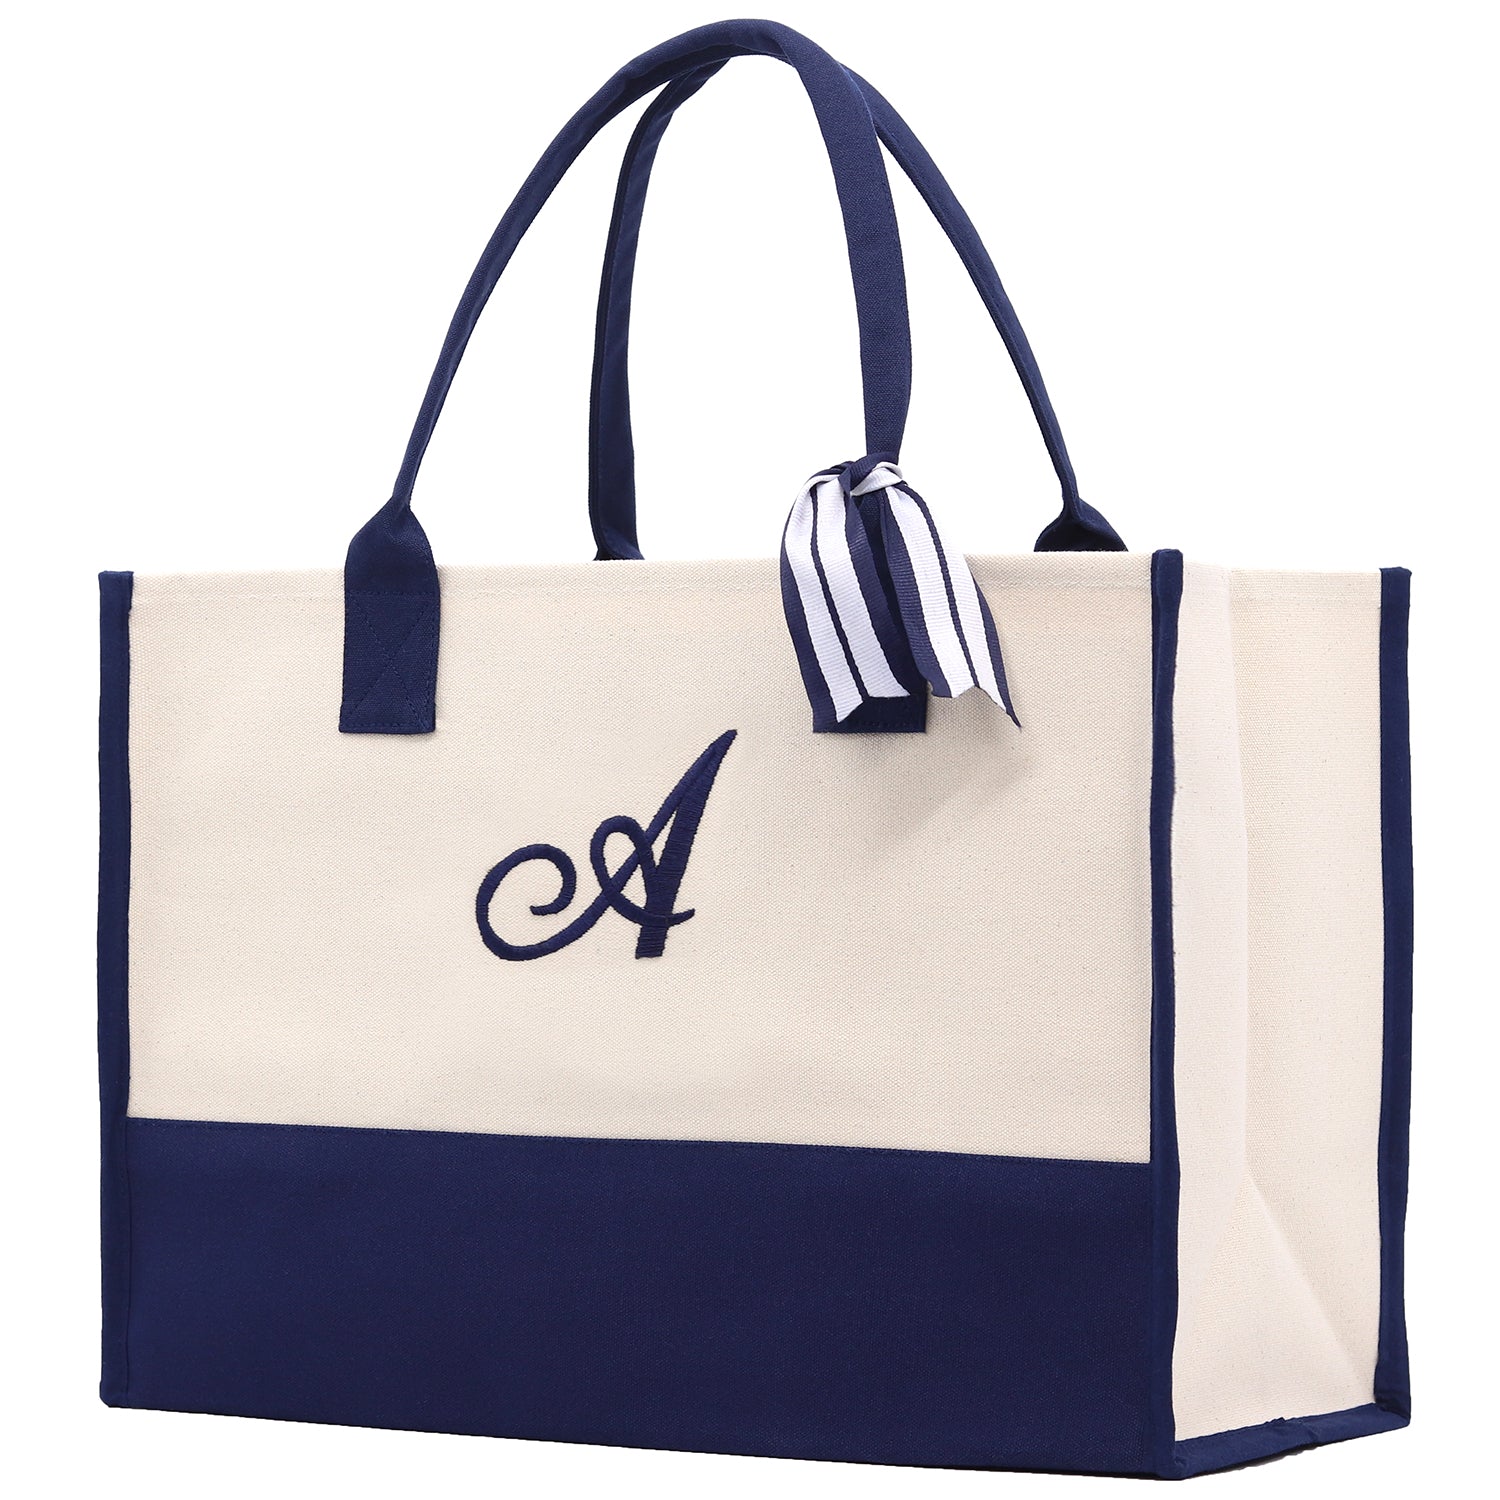 Monogram Tote Bag with 100% Cotton Canvas and a Chic Personalized Monogram Navy Blue Vanessa Rosella Script A 